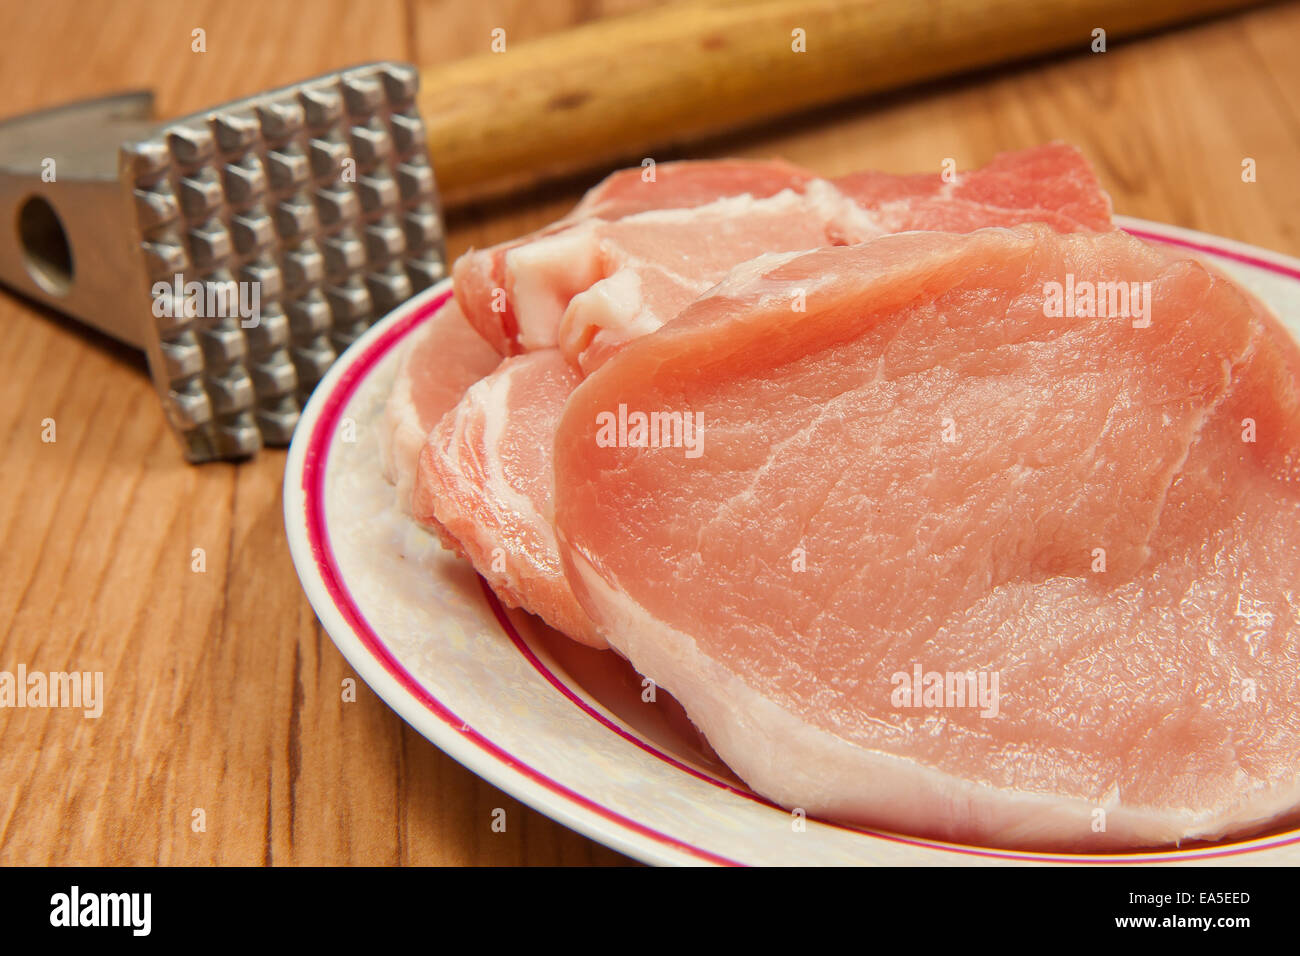 Sliced pork chops  and a kitchen hammer. Stock Photo